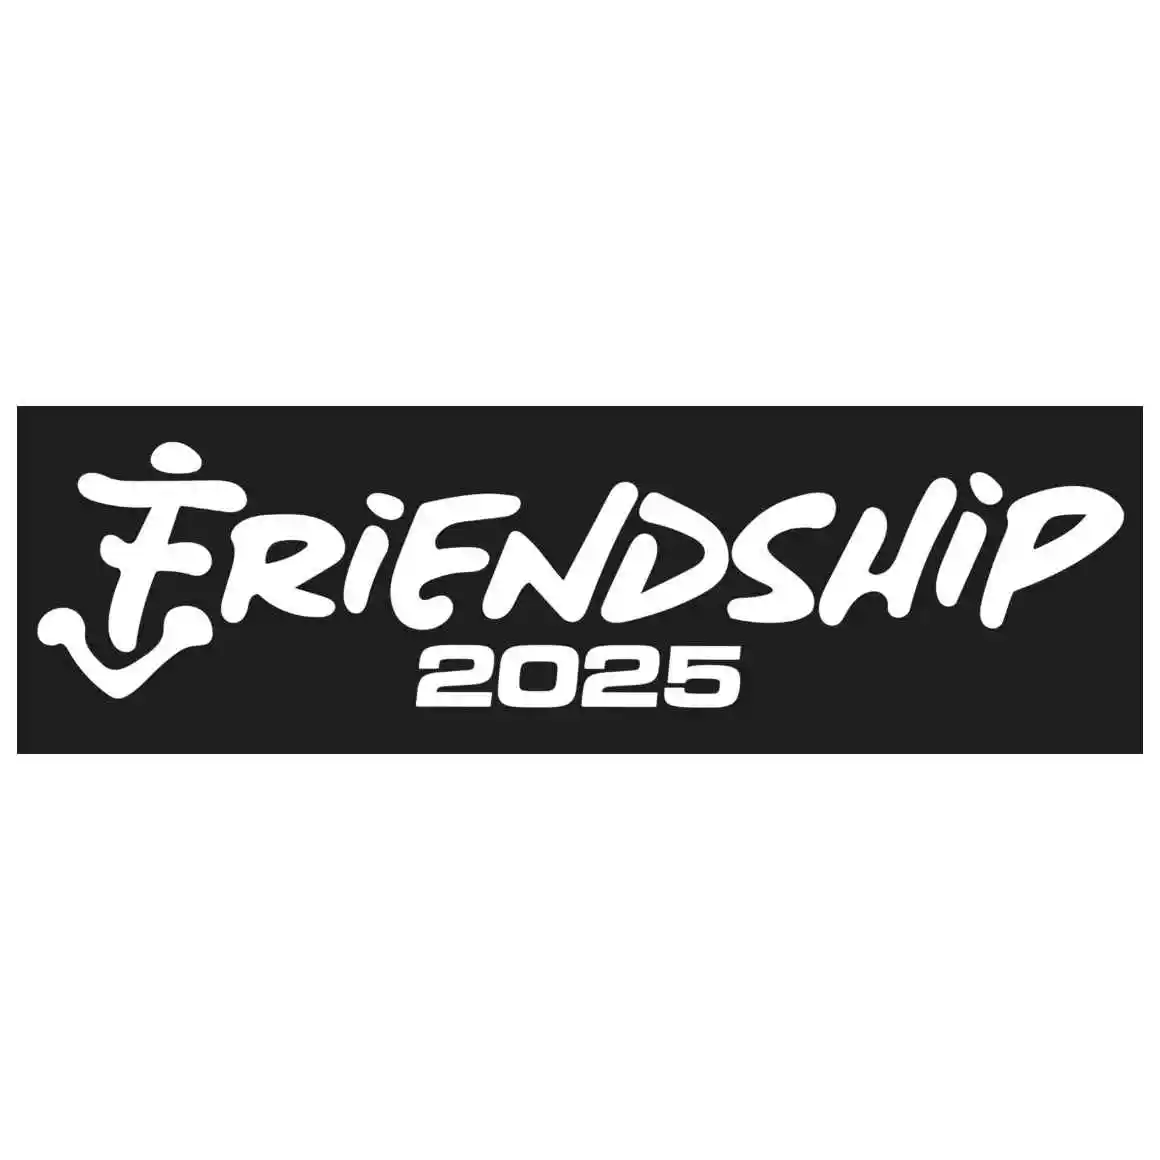 Friendship 2025: Book Friendship 2025 for Only $250